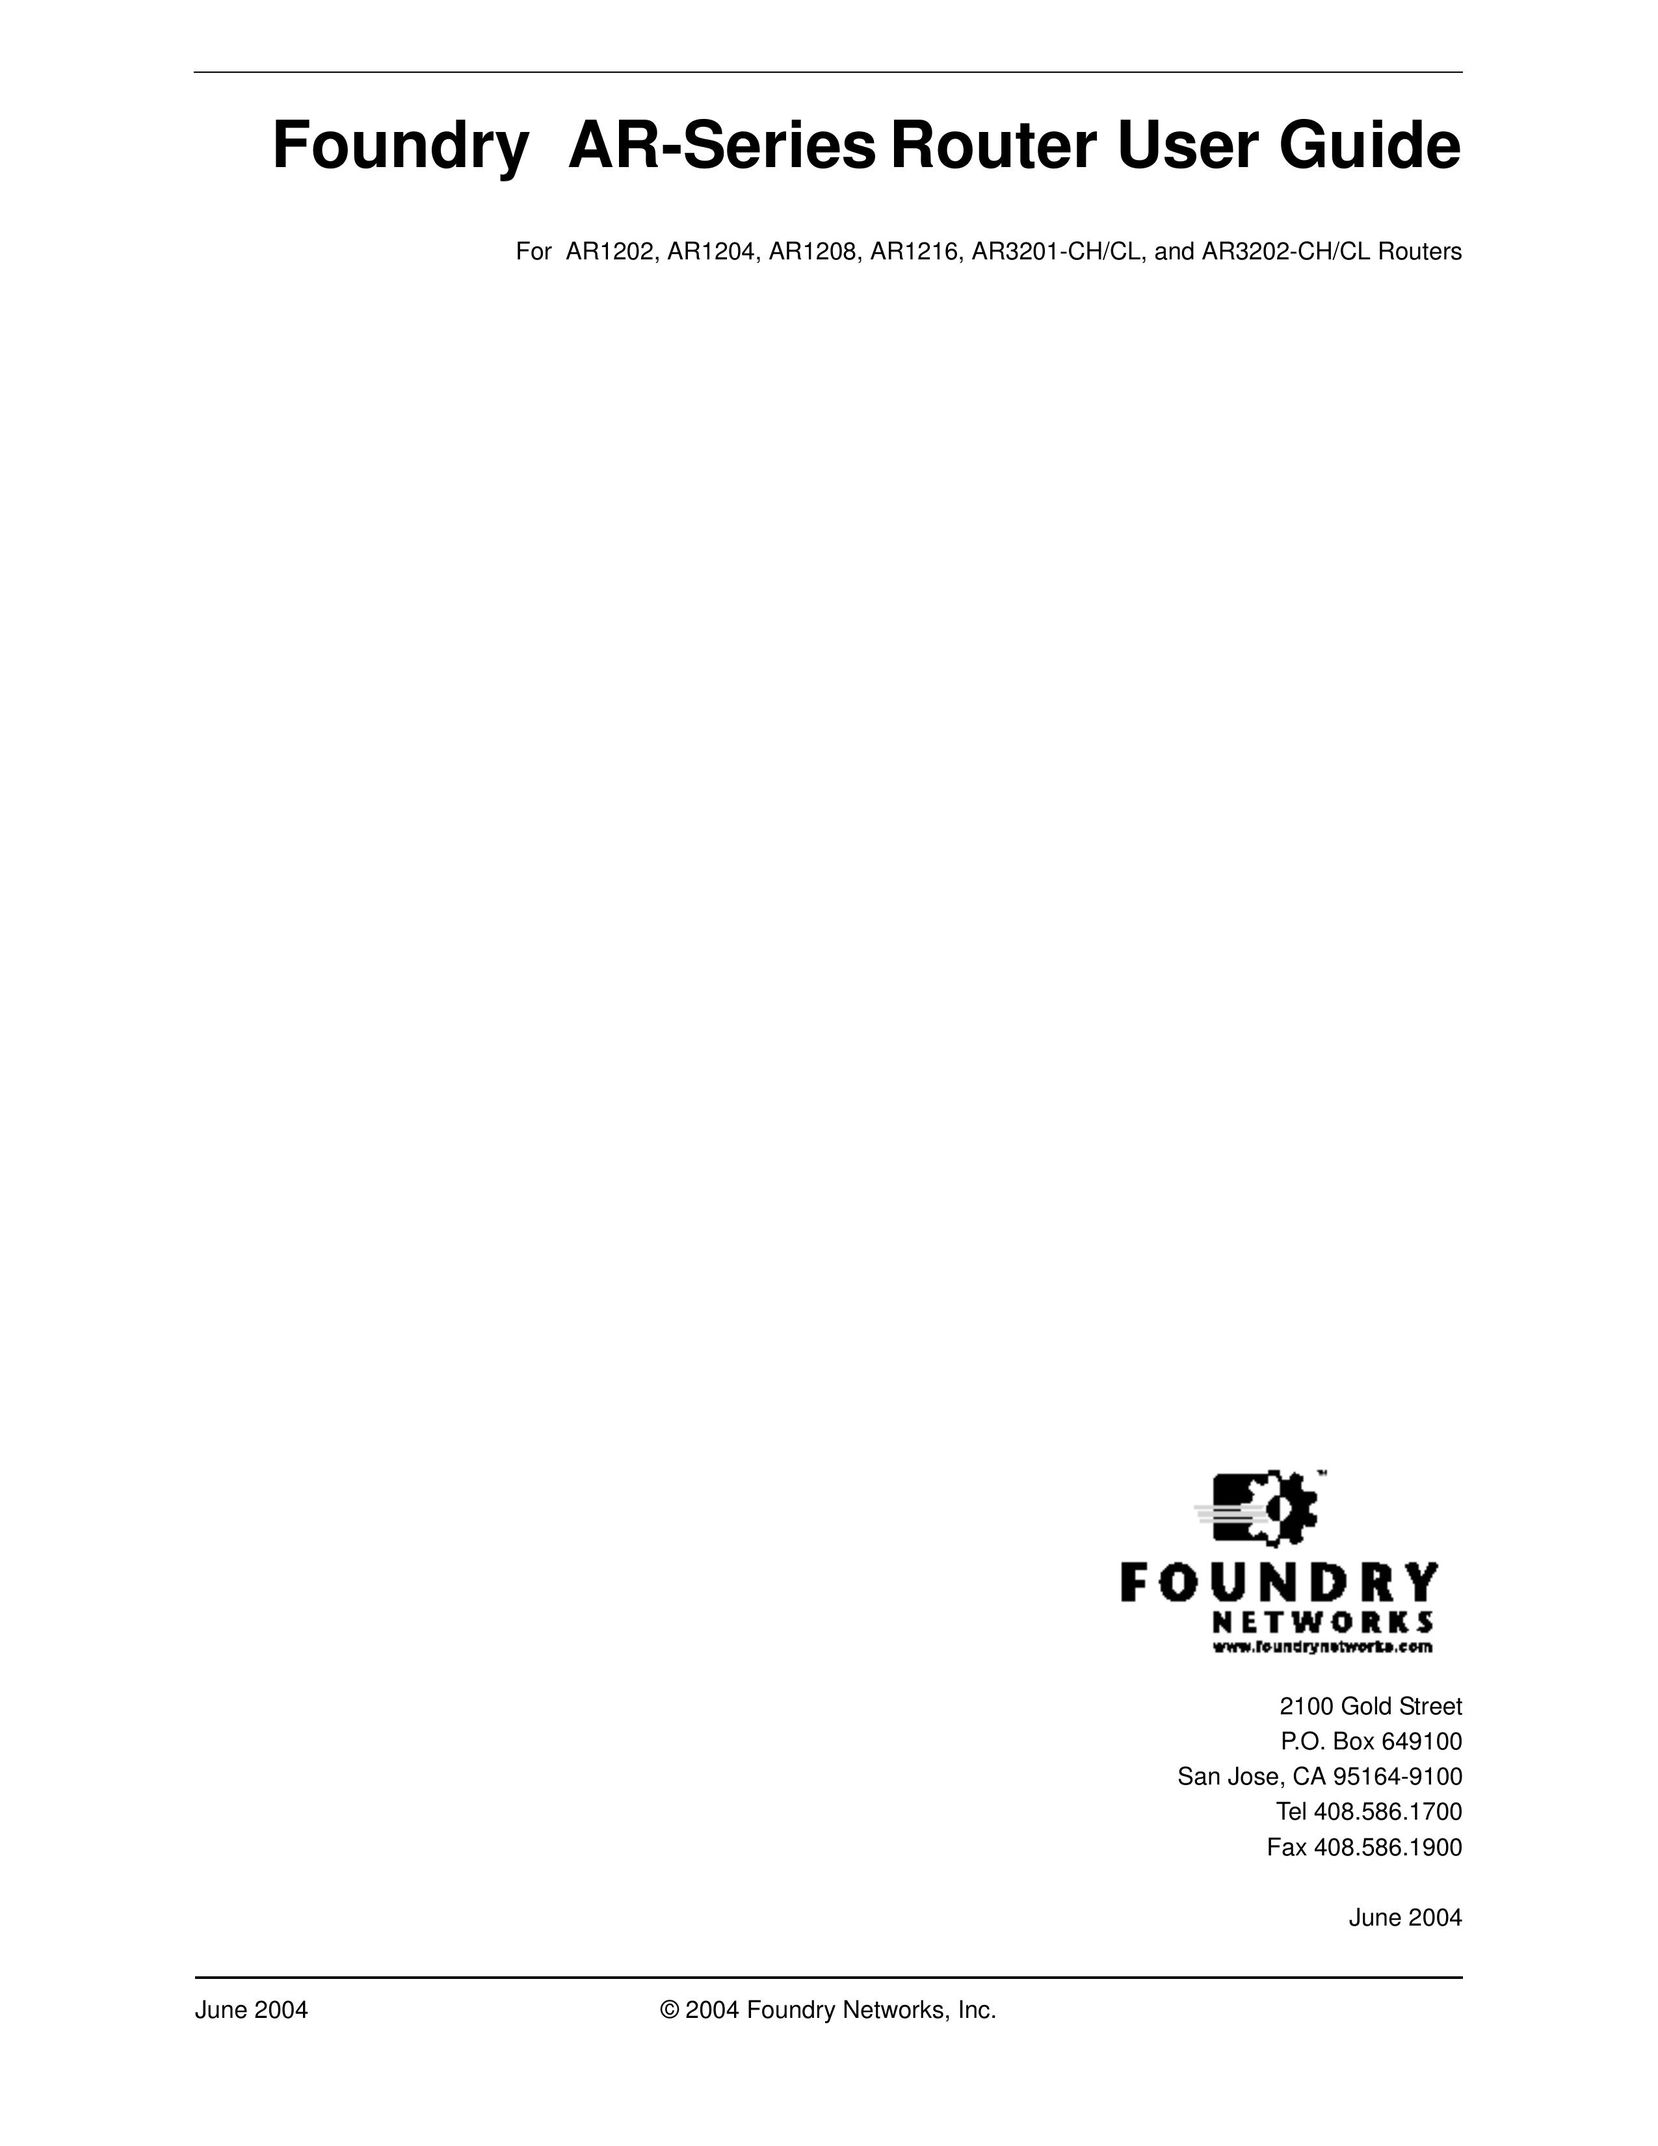 Foundry Networks AR3201-CL Network Router User Manual